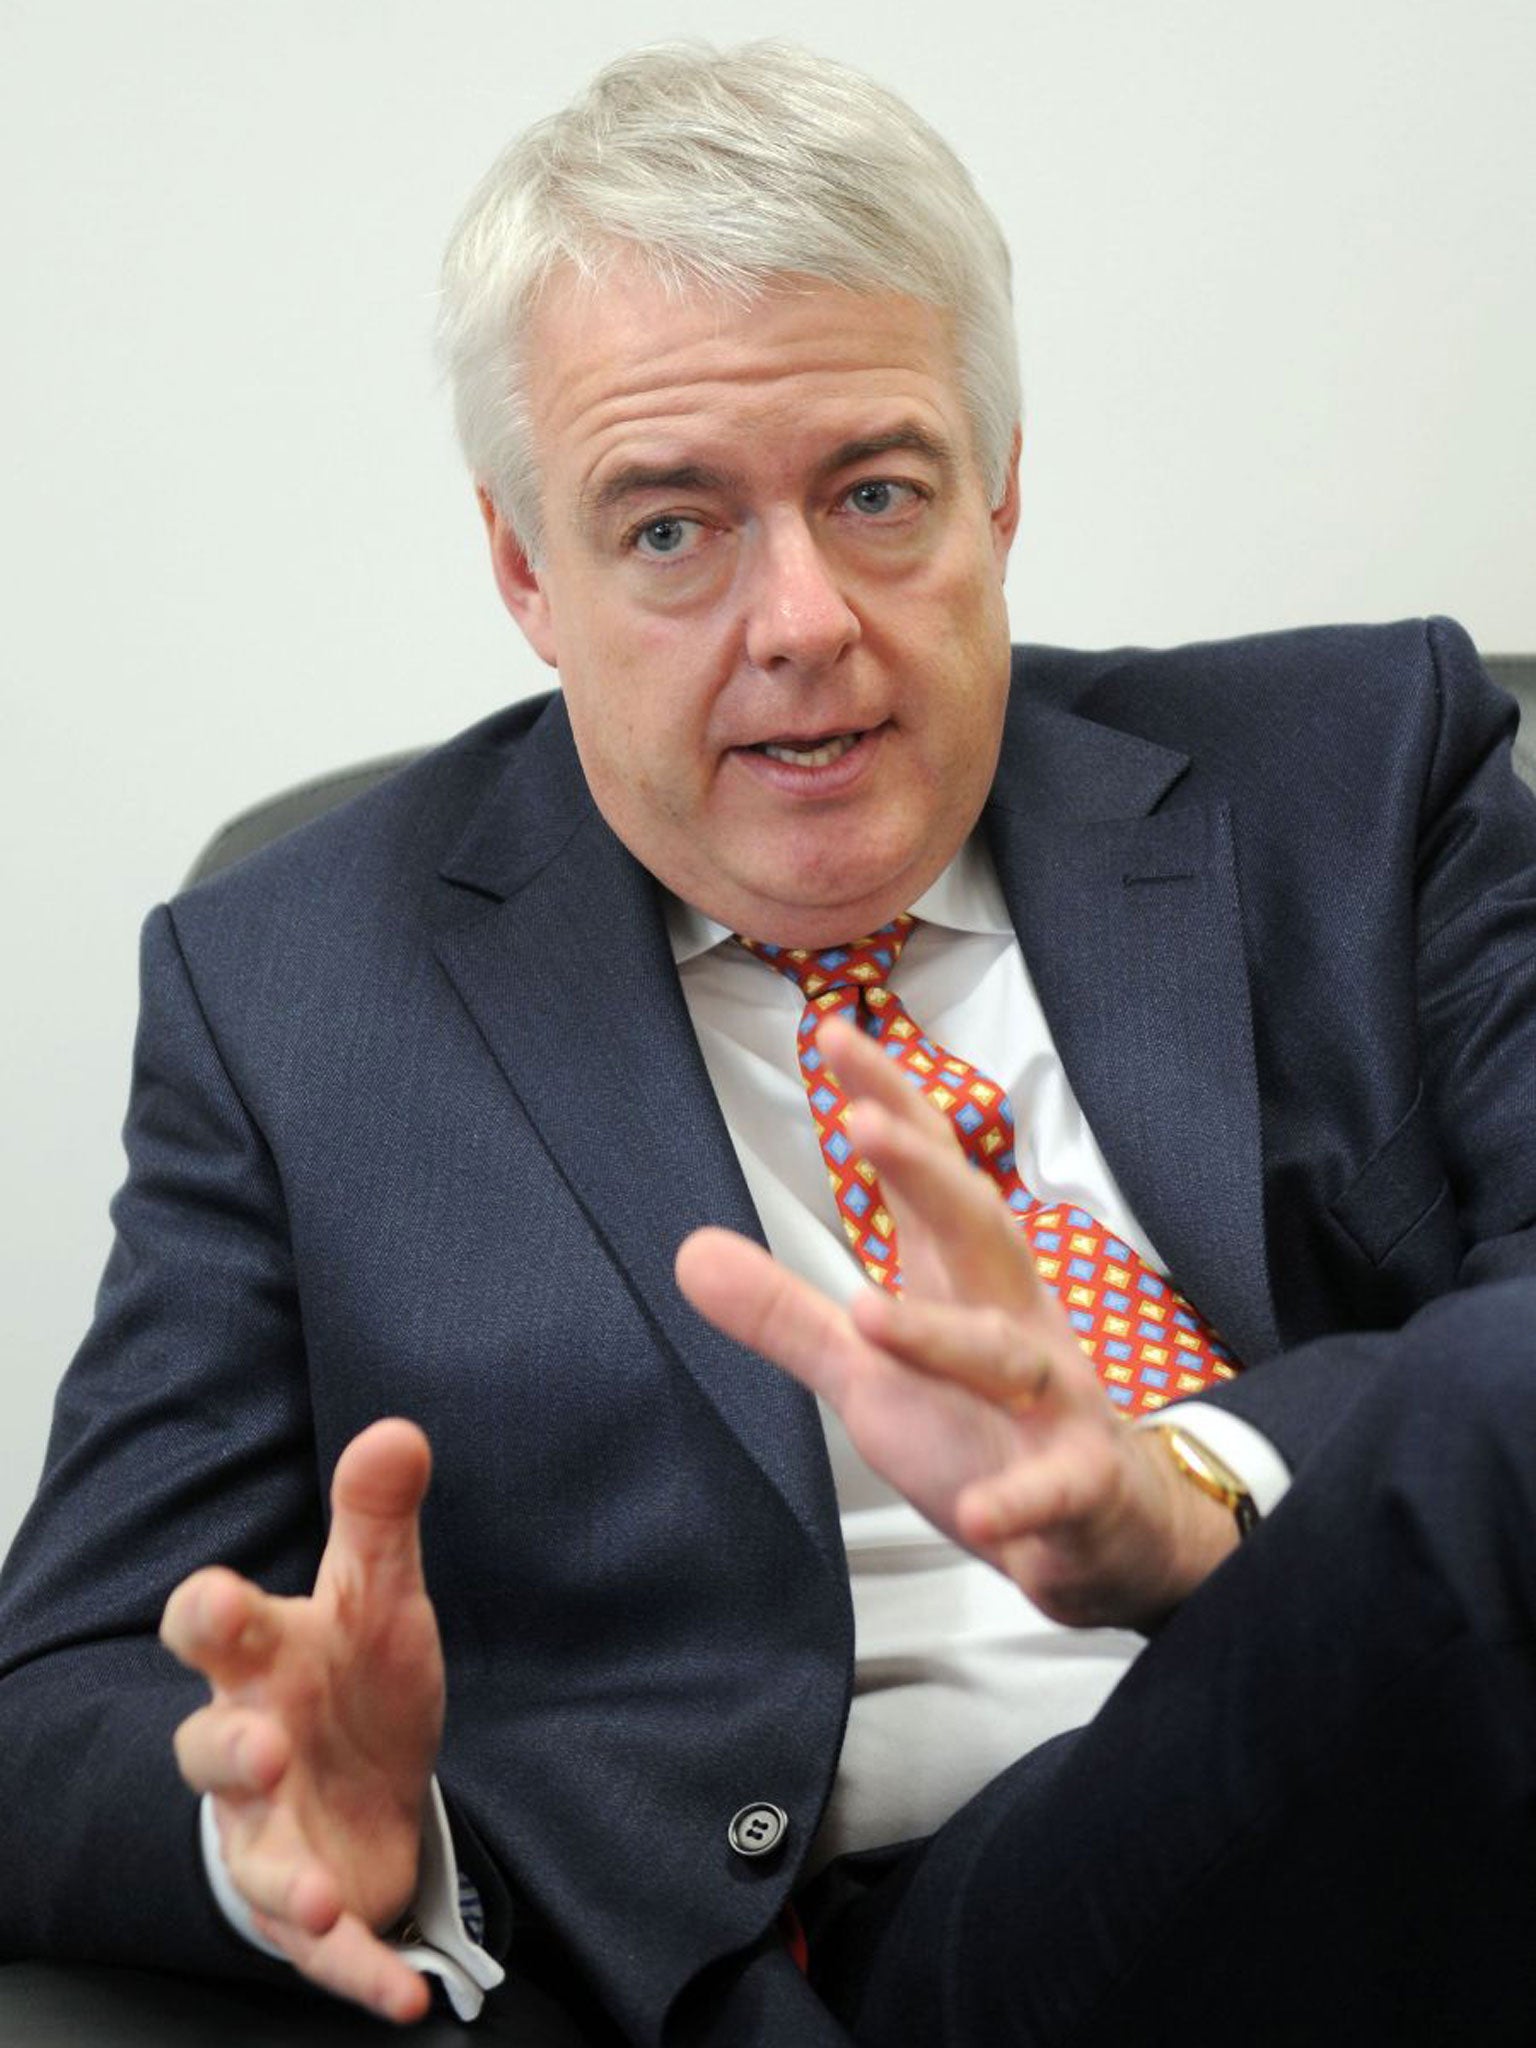 Carwyn Jones says tax-raising powers for the Welsh Assembly is ‘an emotional issue’